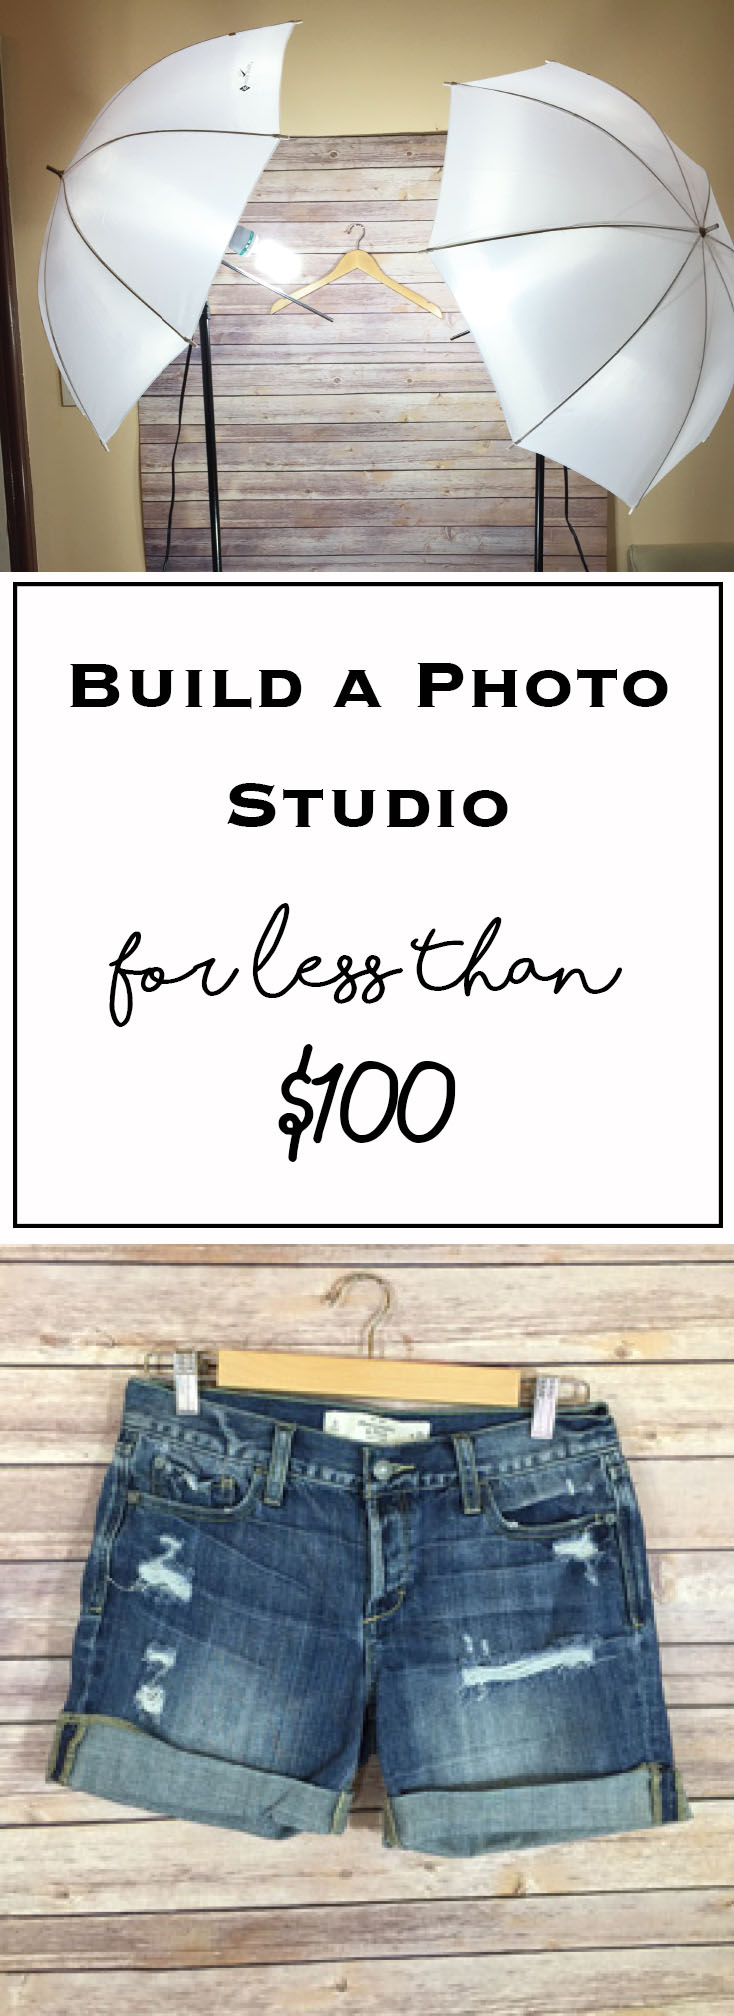 How To Build a Photo Studio for Less Than $100